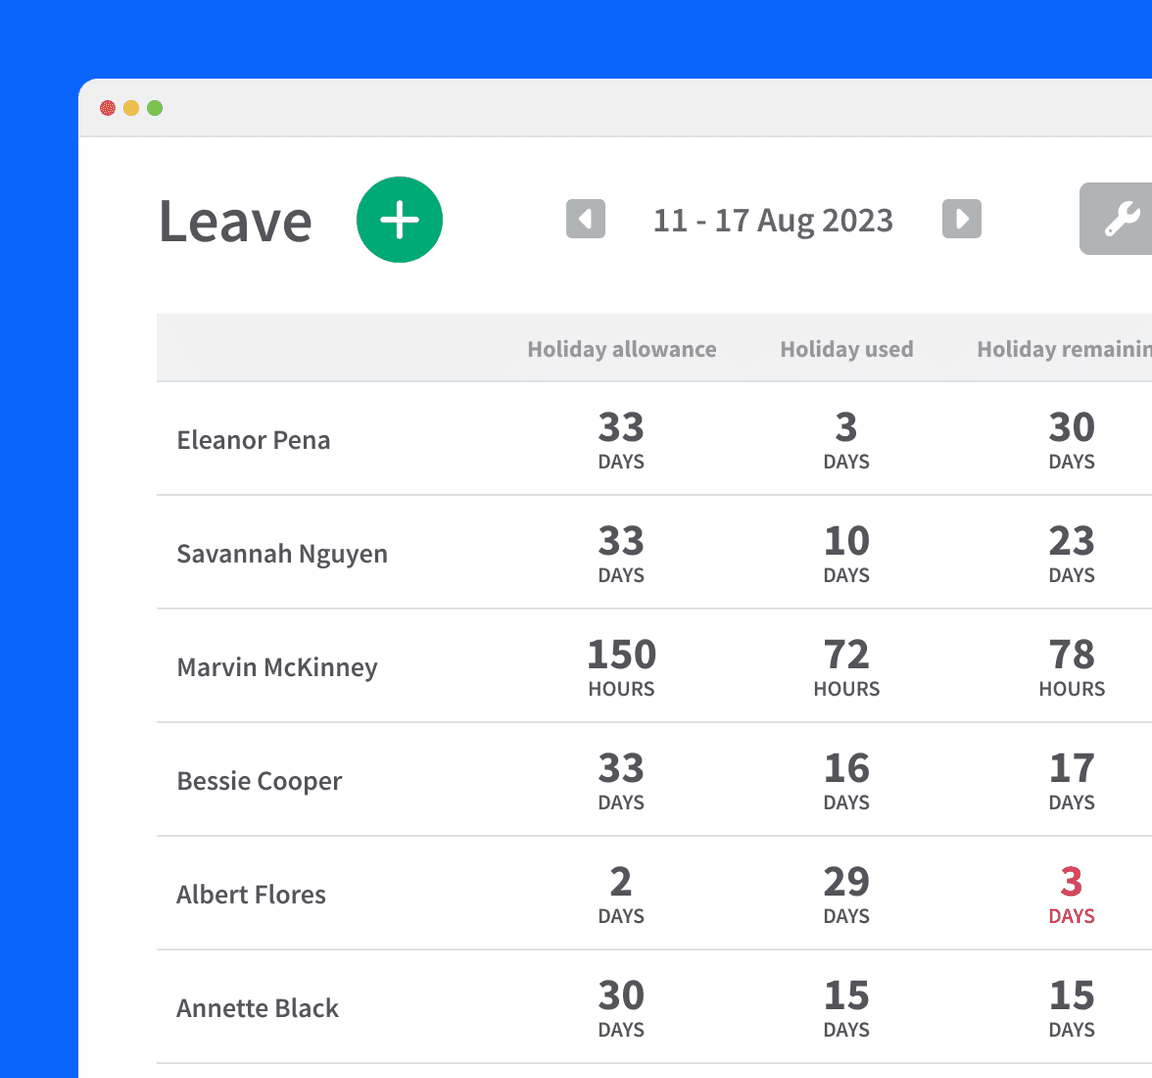 Three employees with their total annual leave allowances, leave used, and remaining leave.